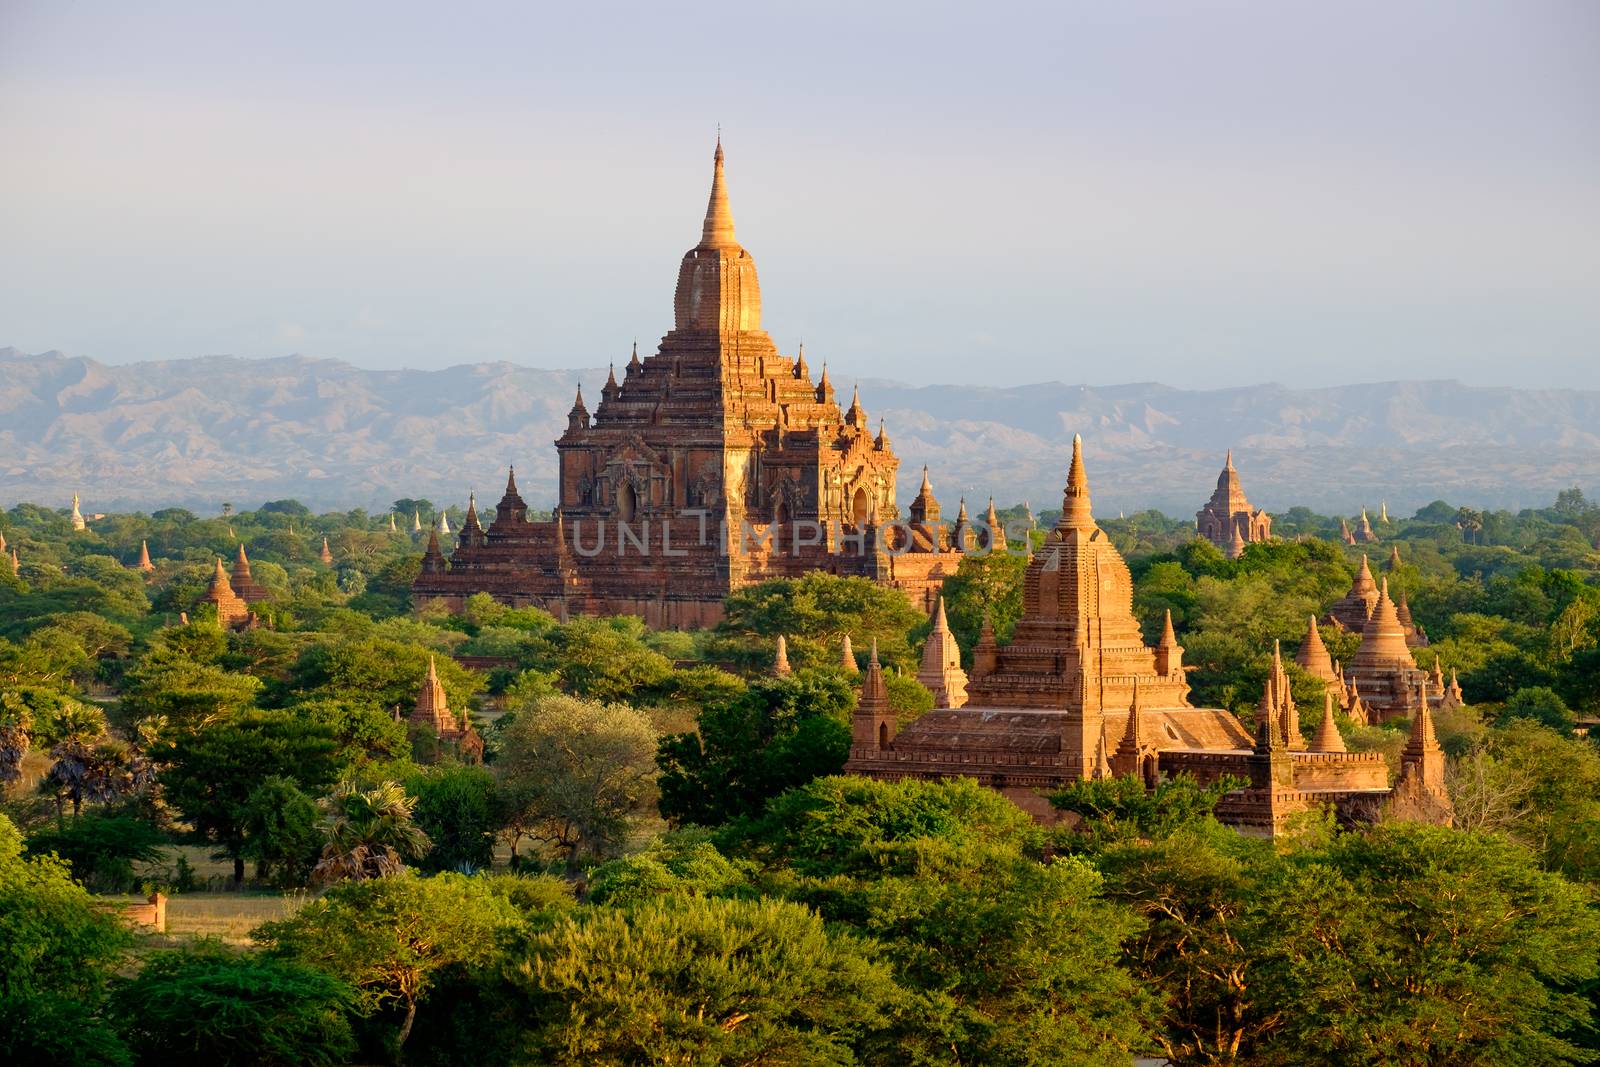 Scenic view of antient Sulamani temple at sunrise, Bagan, Myanmar by martinm303